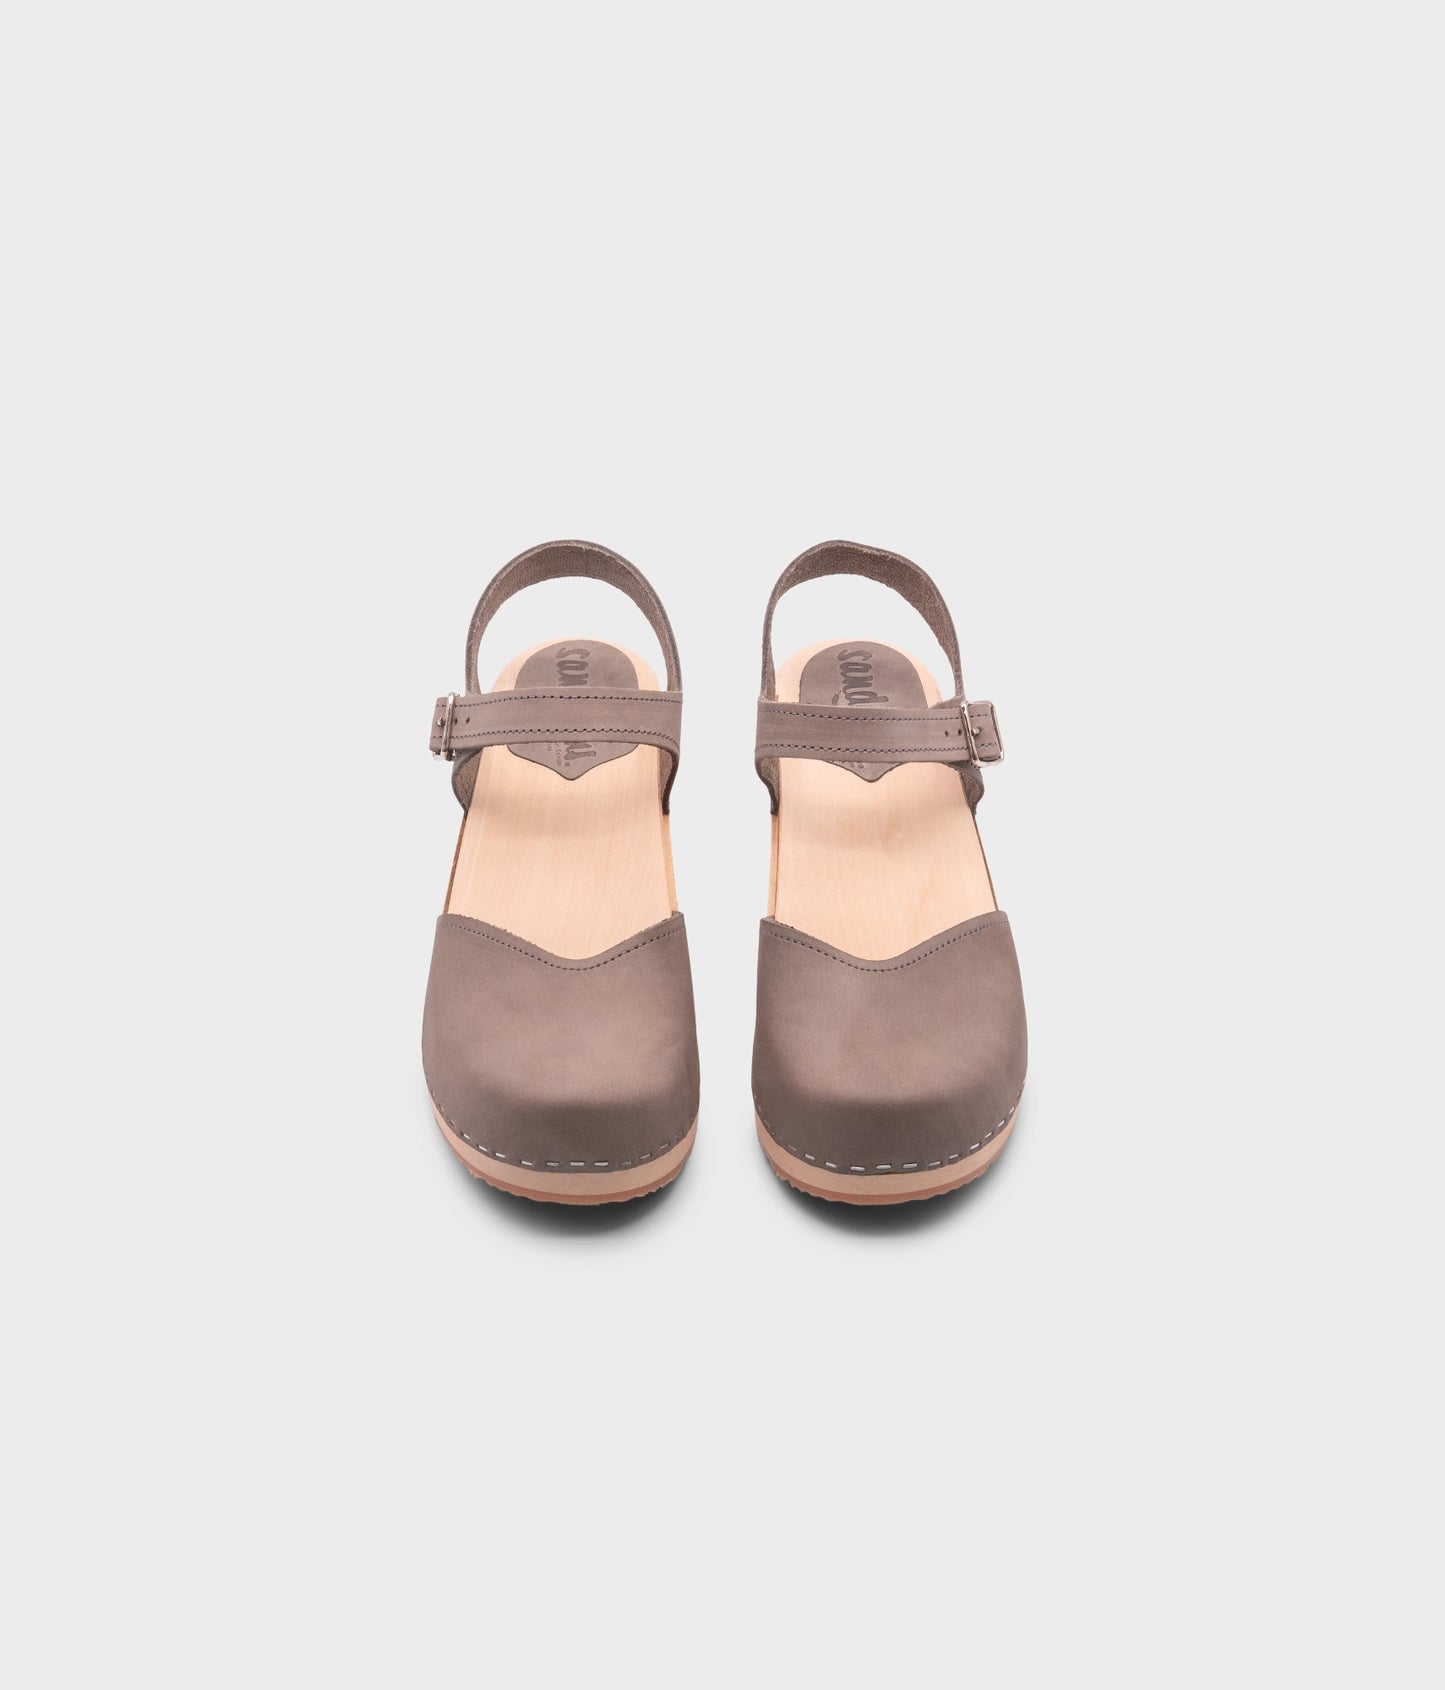 classic low heeled closed-toe sandal in stone grey nubuck leather stapled on a light wooden base